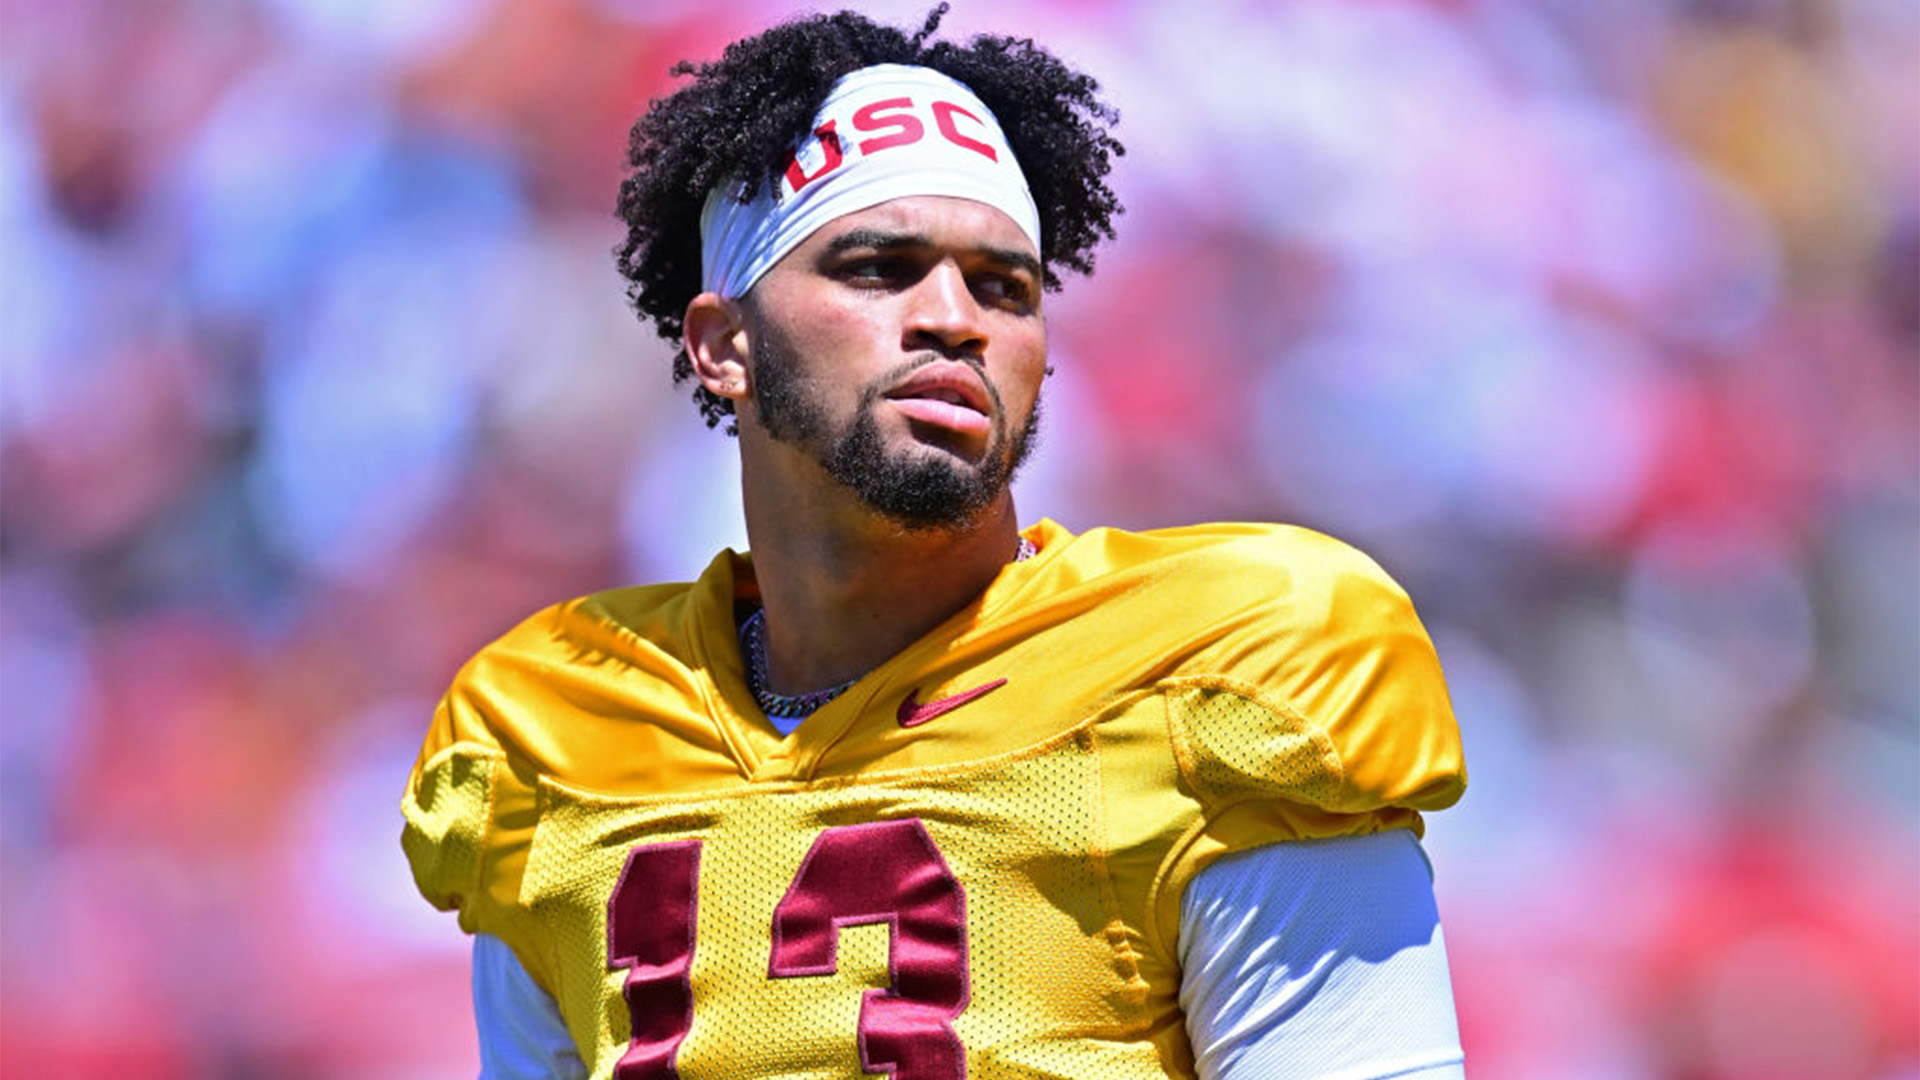 USC's Caleb Williams Became Part Owner Of A Male Grooming Company, Said To Be The First Investment By A College Athlete In The NIL Era